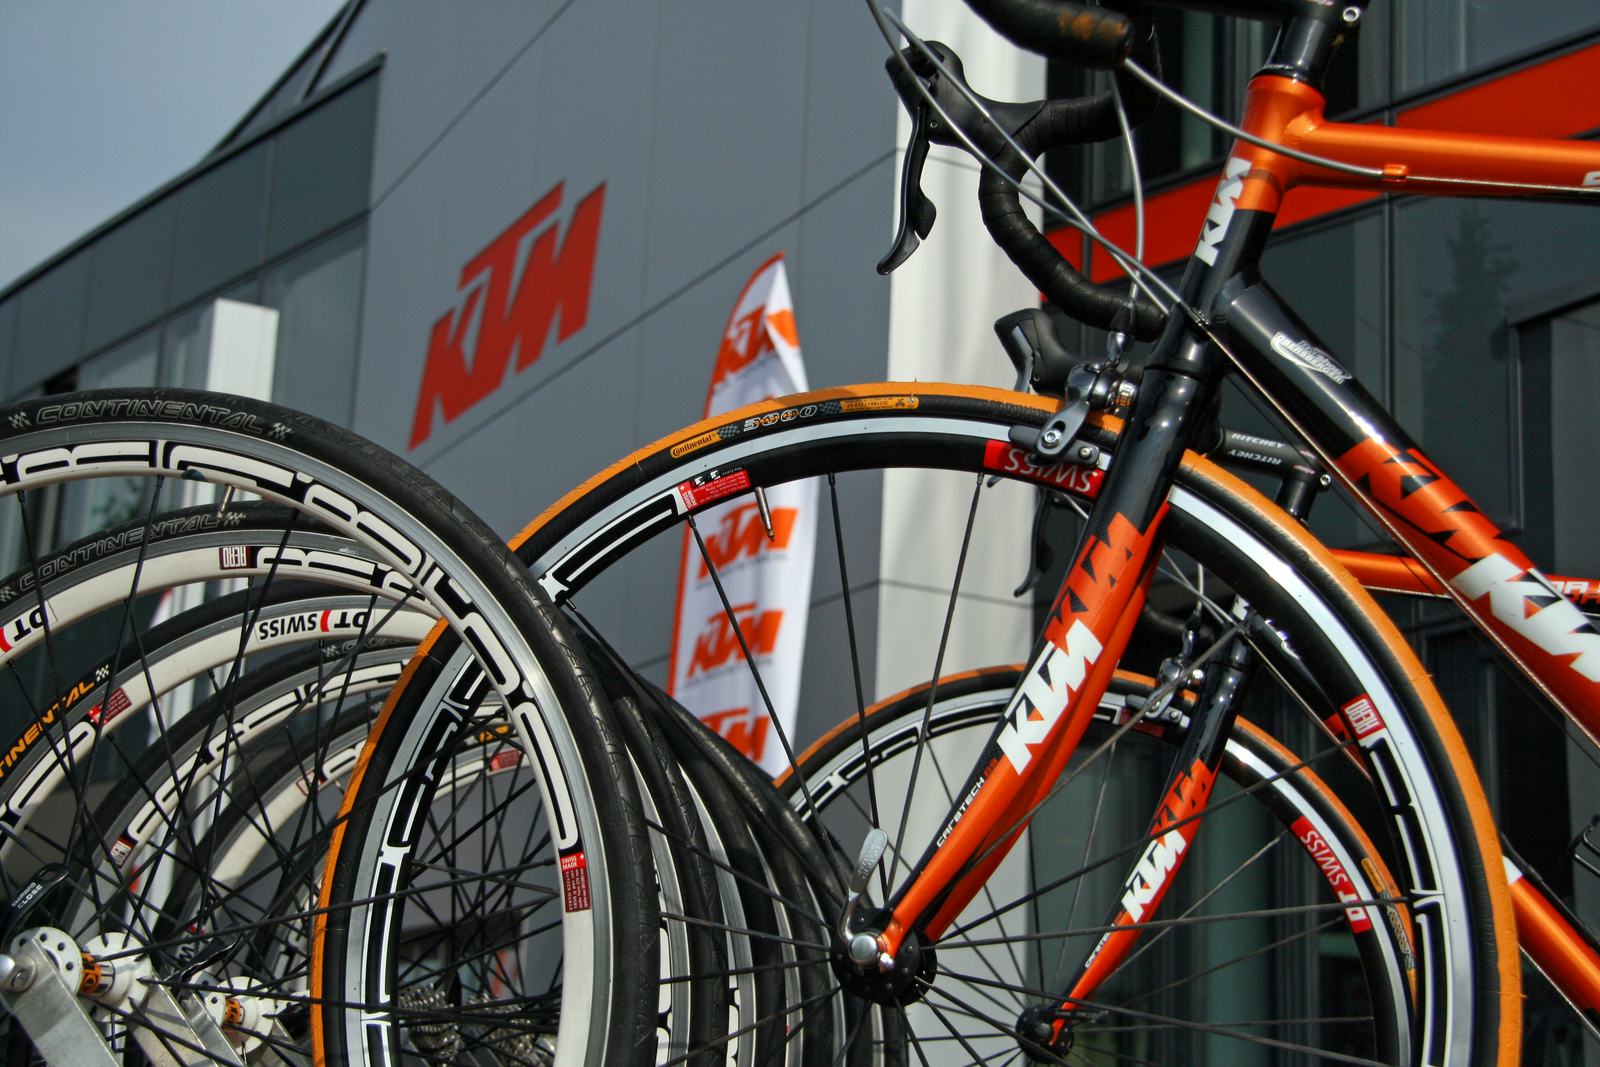 KTM is Austria’s biggest bike maker. The company saw overall bike sales drop by 7% on its domestic market. - Photo Jo Beckendorff